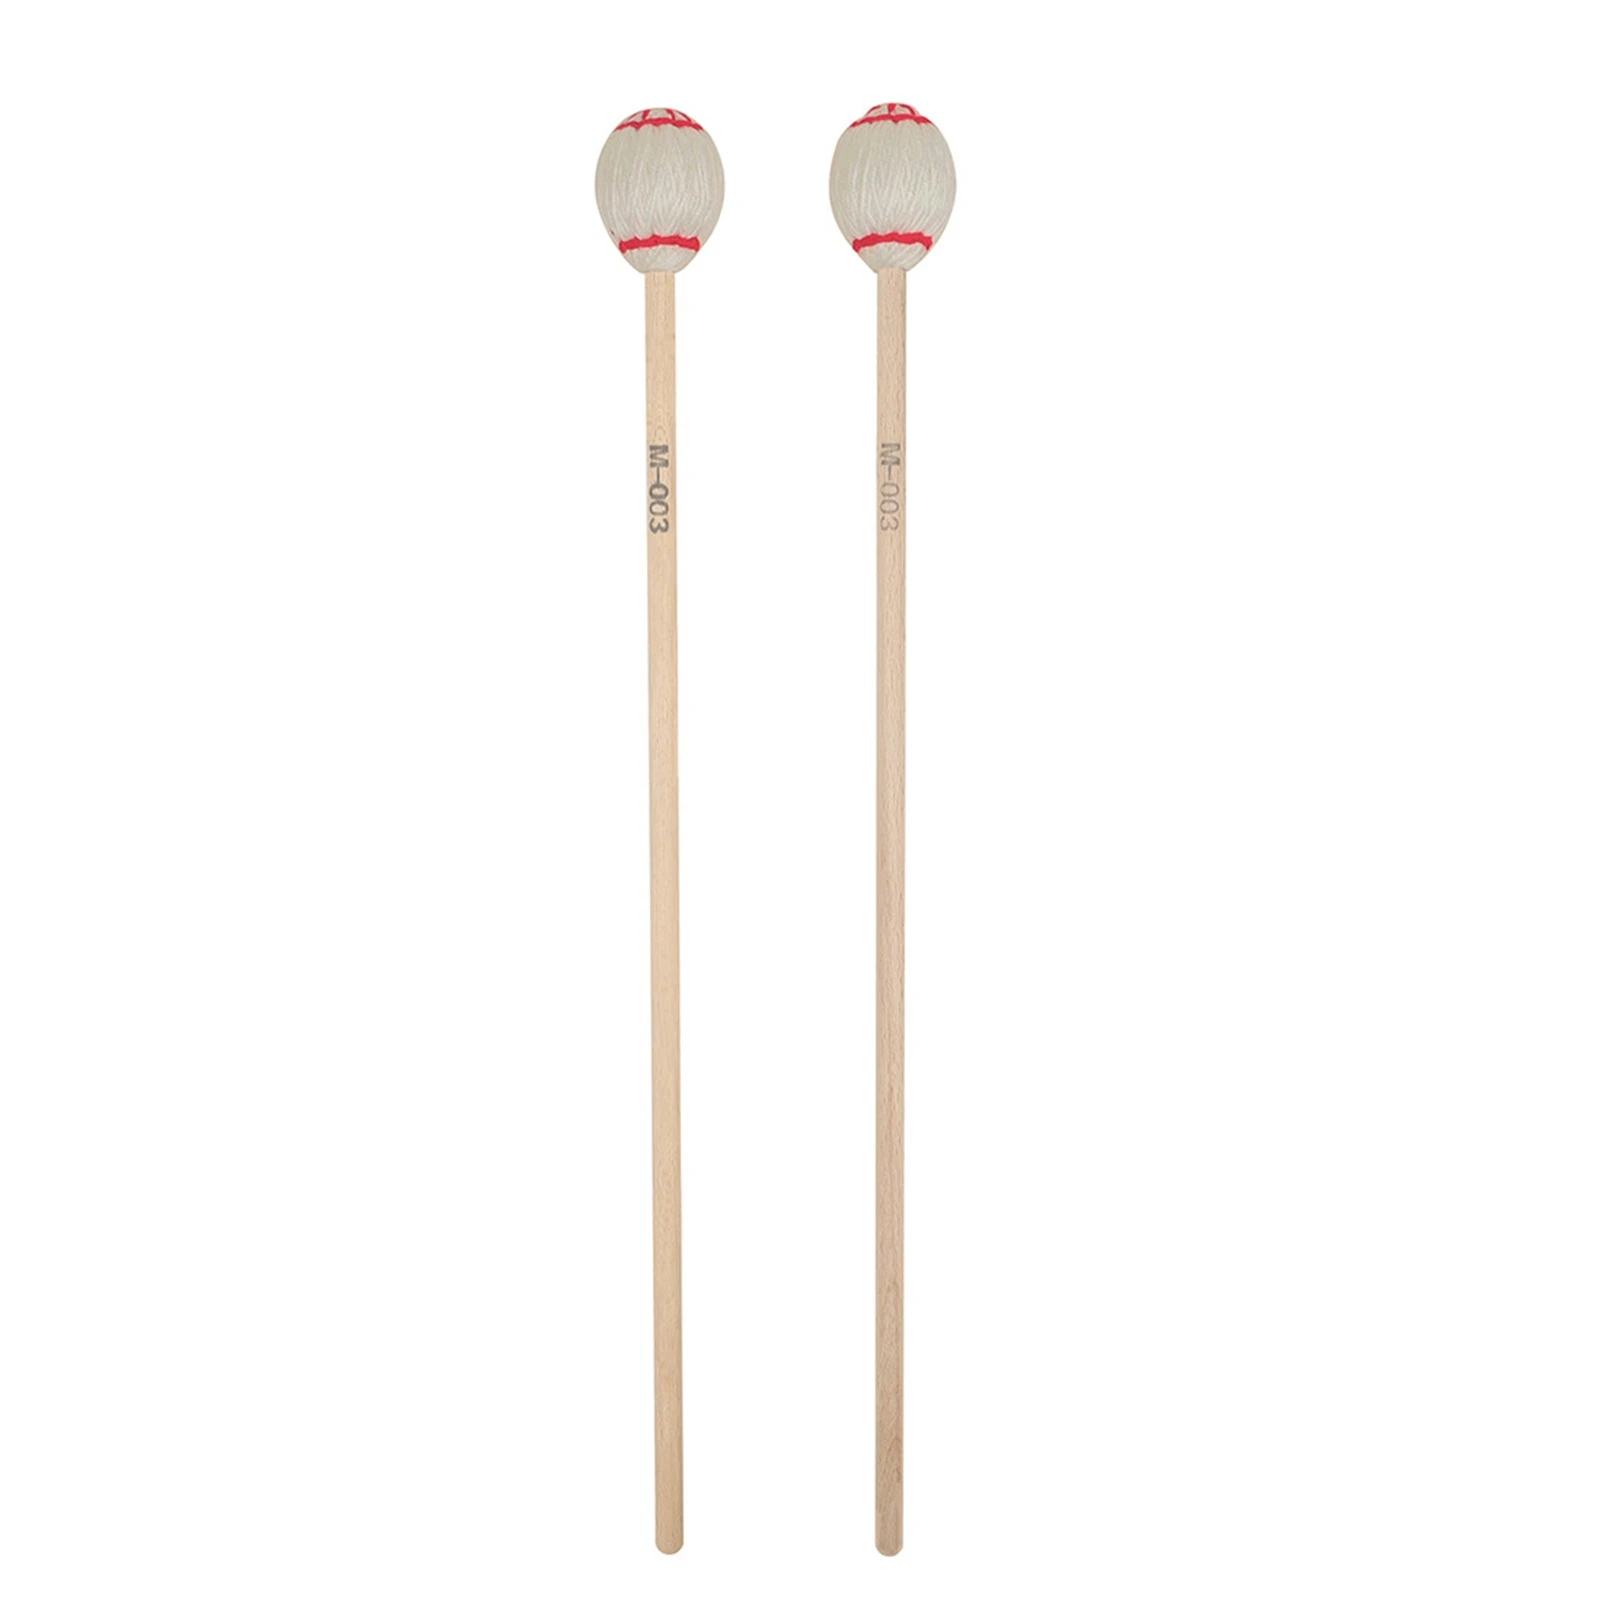 2pcs Keyboard Marimba Mallets Maple Handle Soft Head Professionals Drumstick Drums Percussion Accessory Music Play Parts